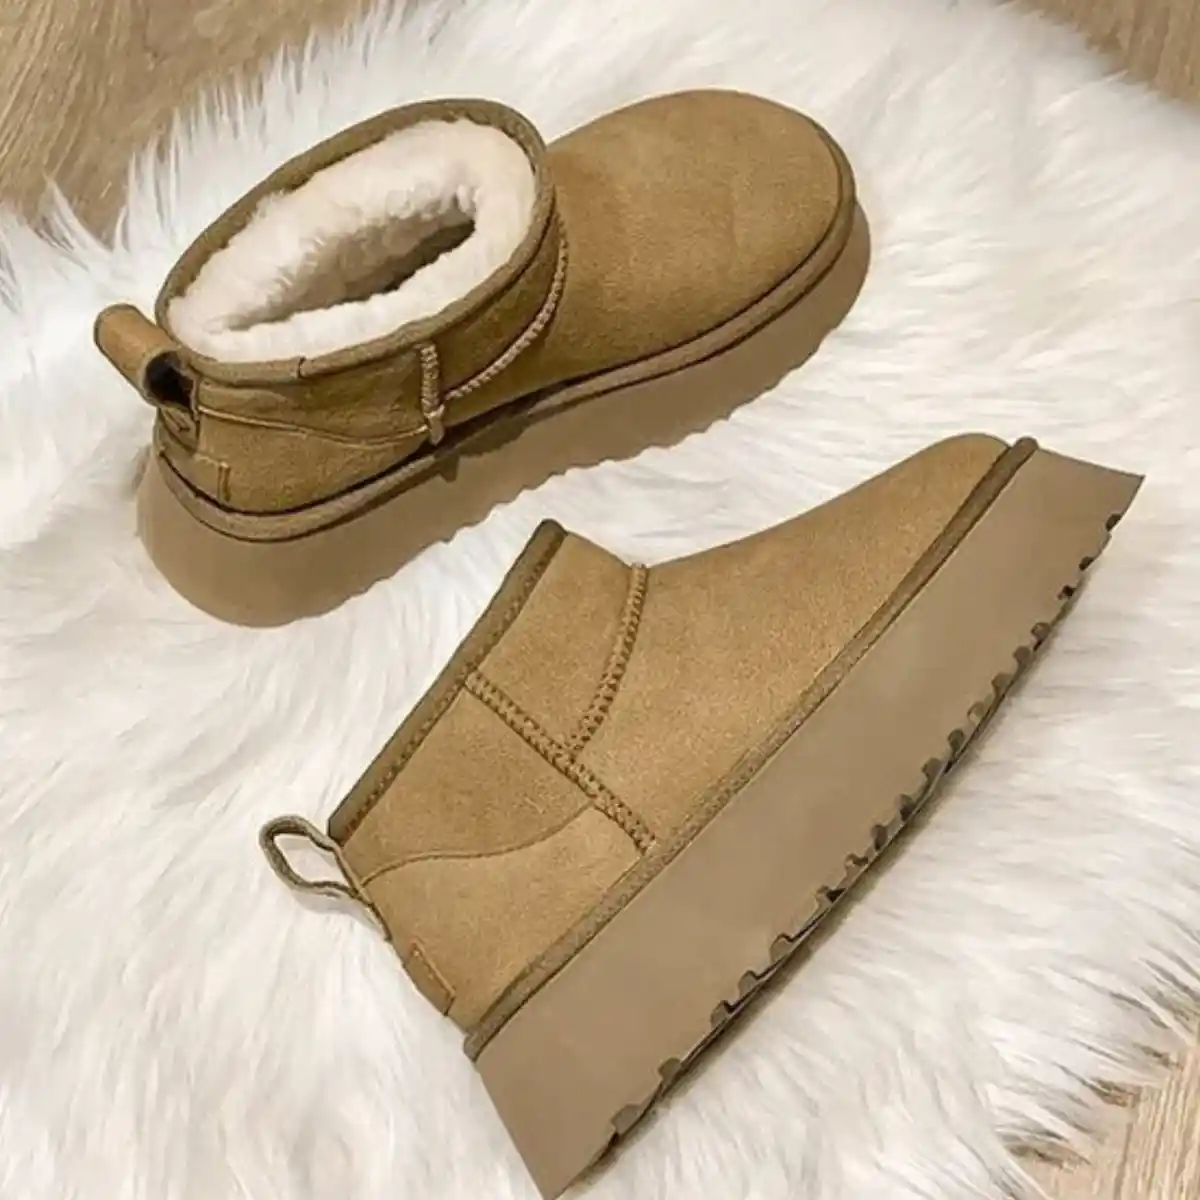 Ugg boots dupe etsy